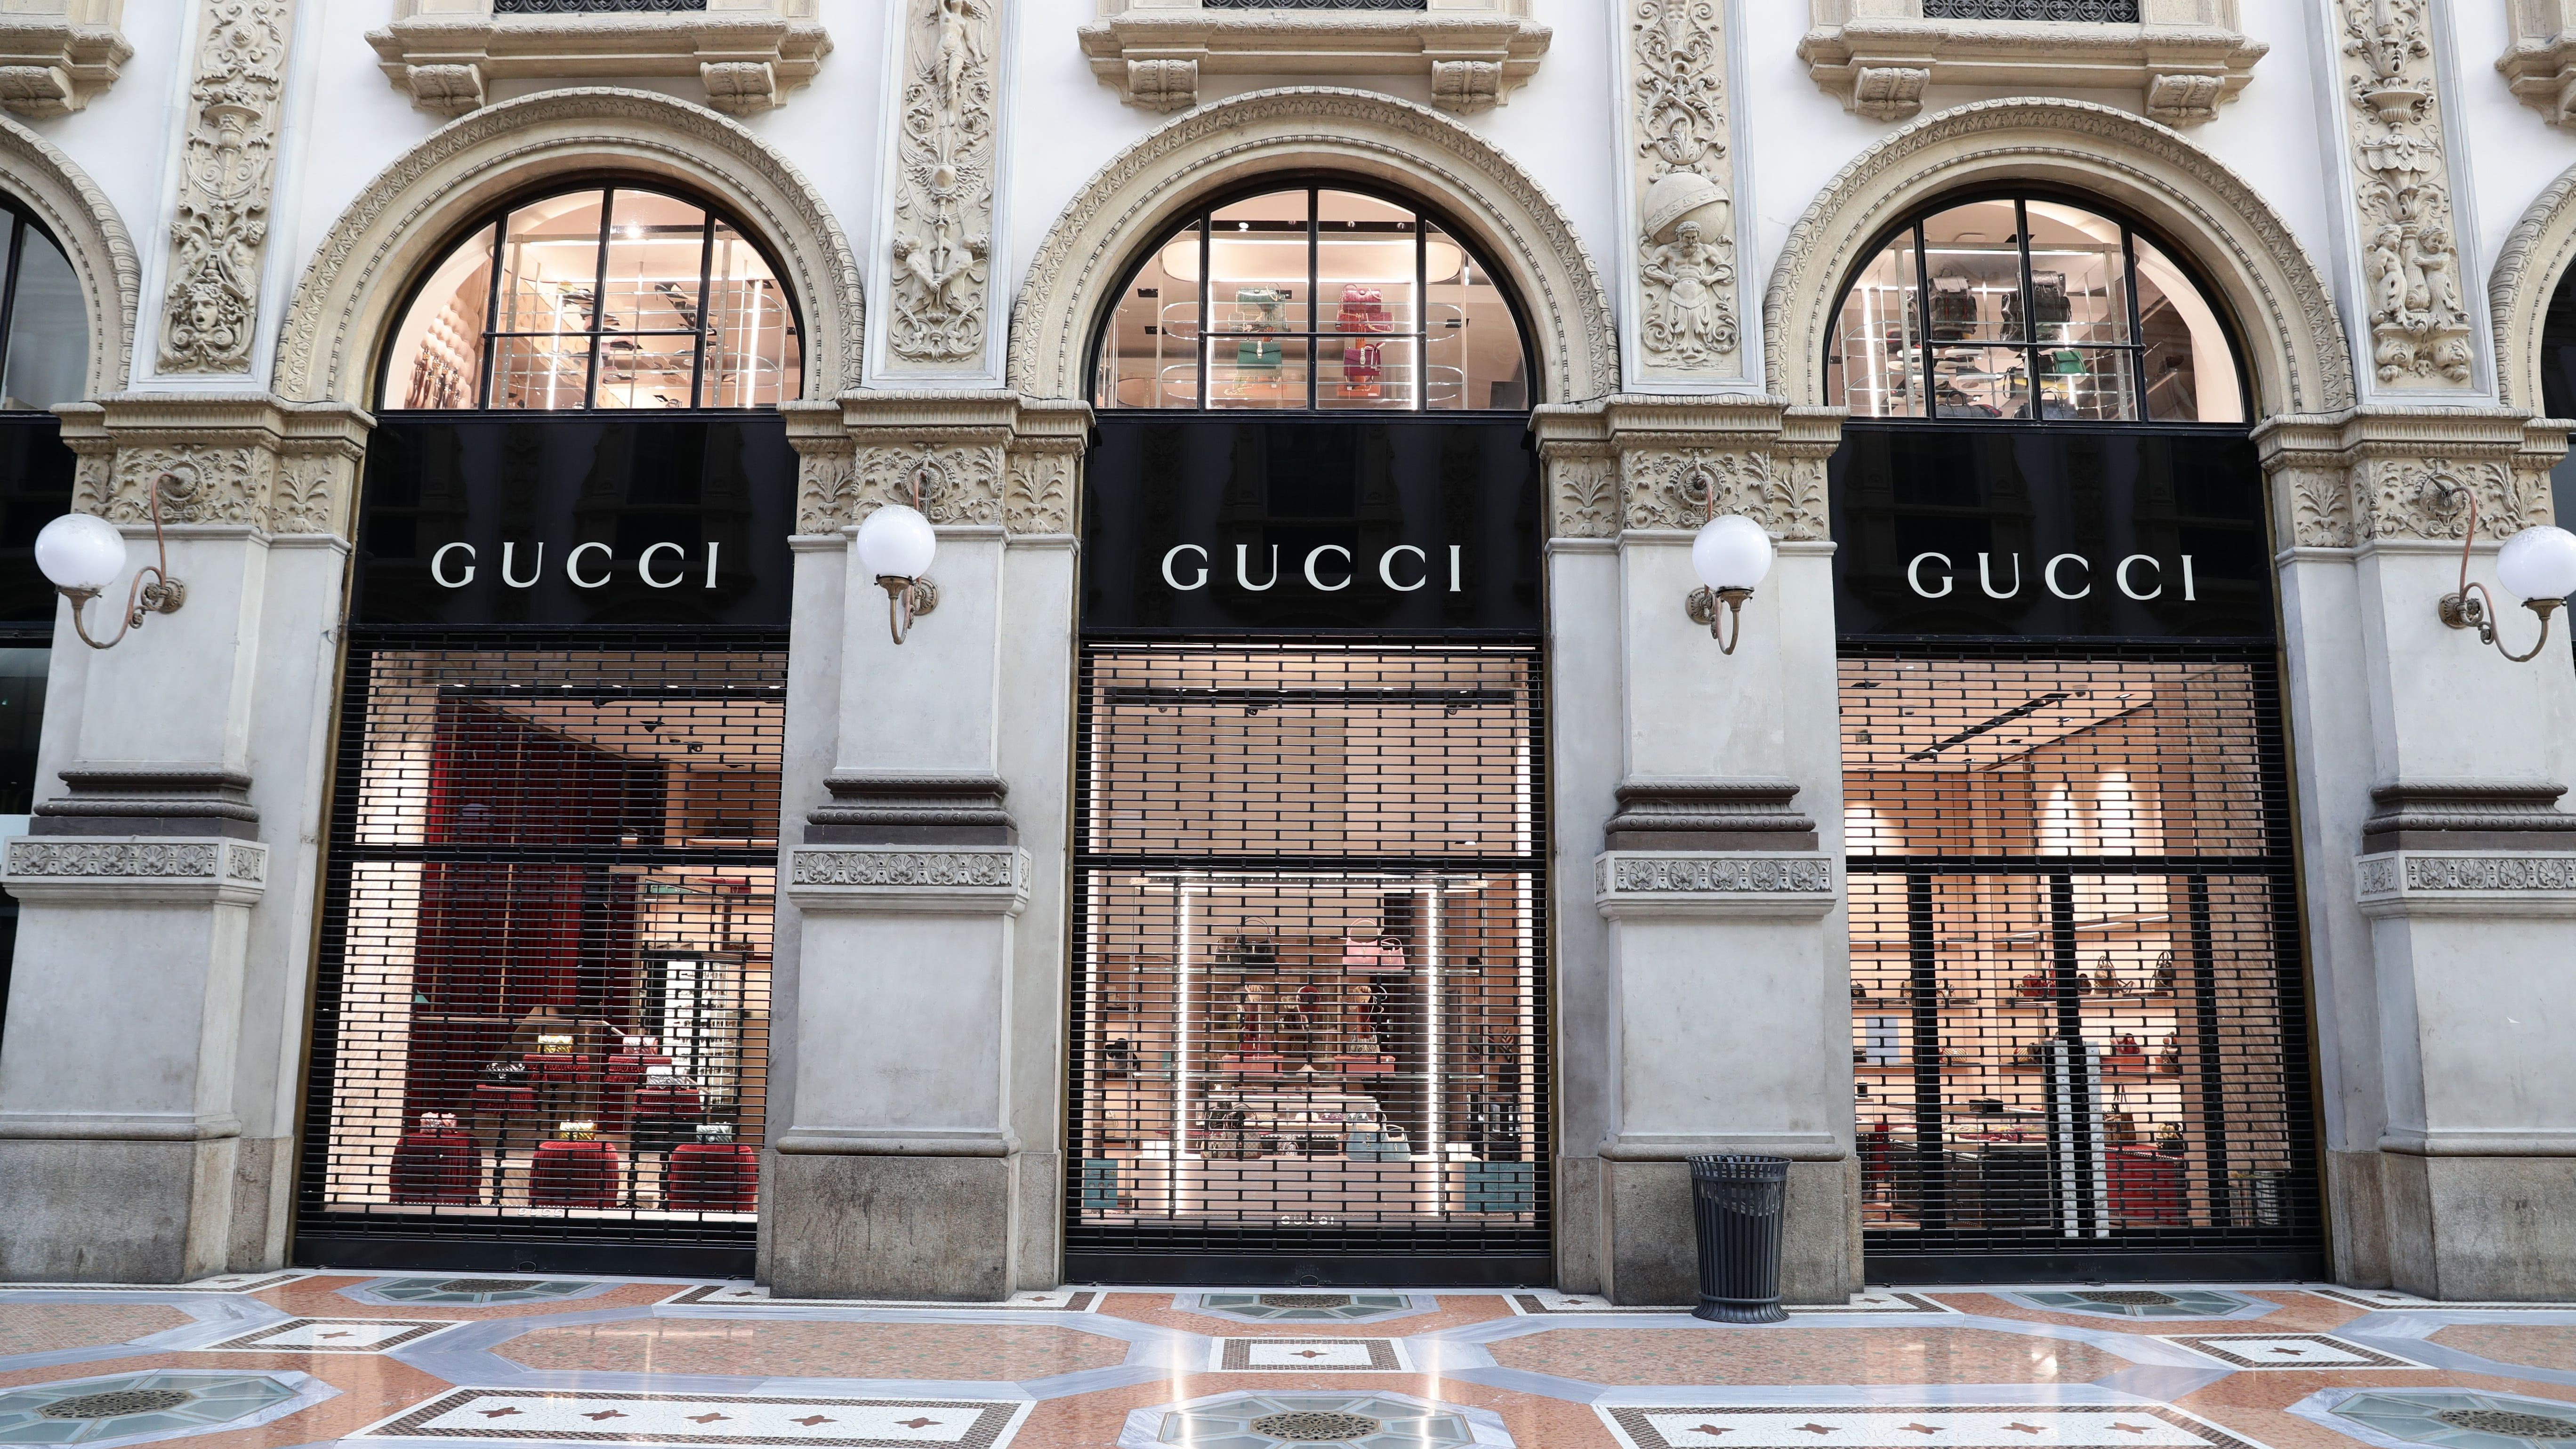 Kering: Market's Focus Is On Gucci And M&A (OTCMKTS:PPRUF